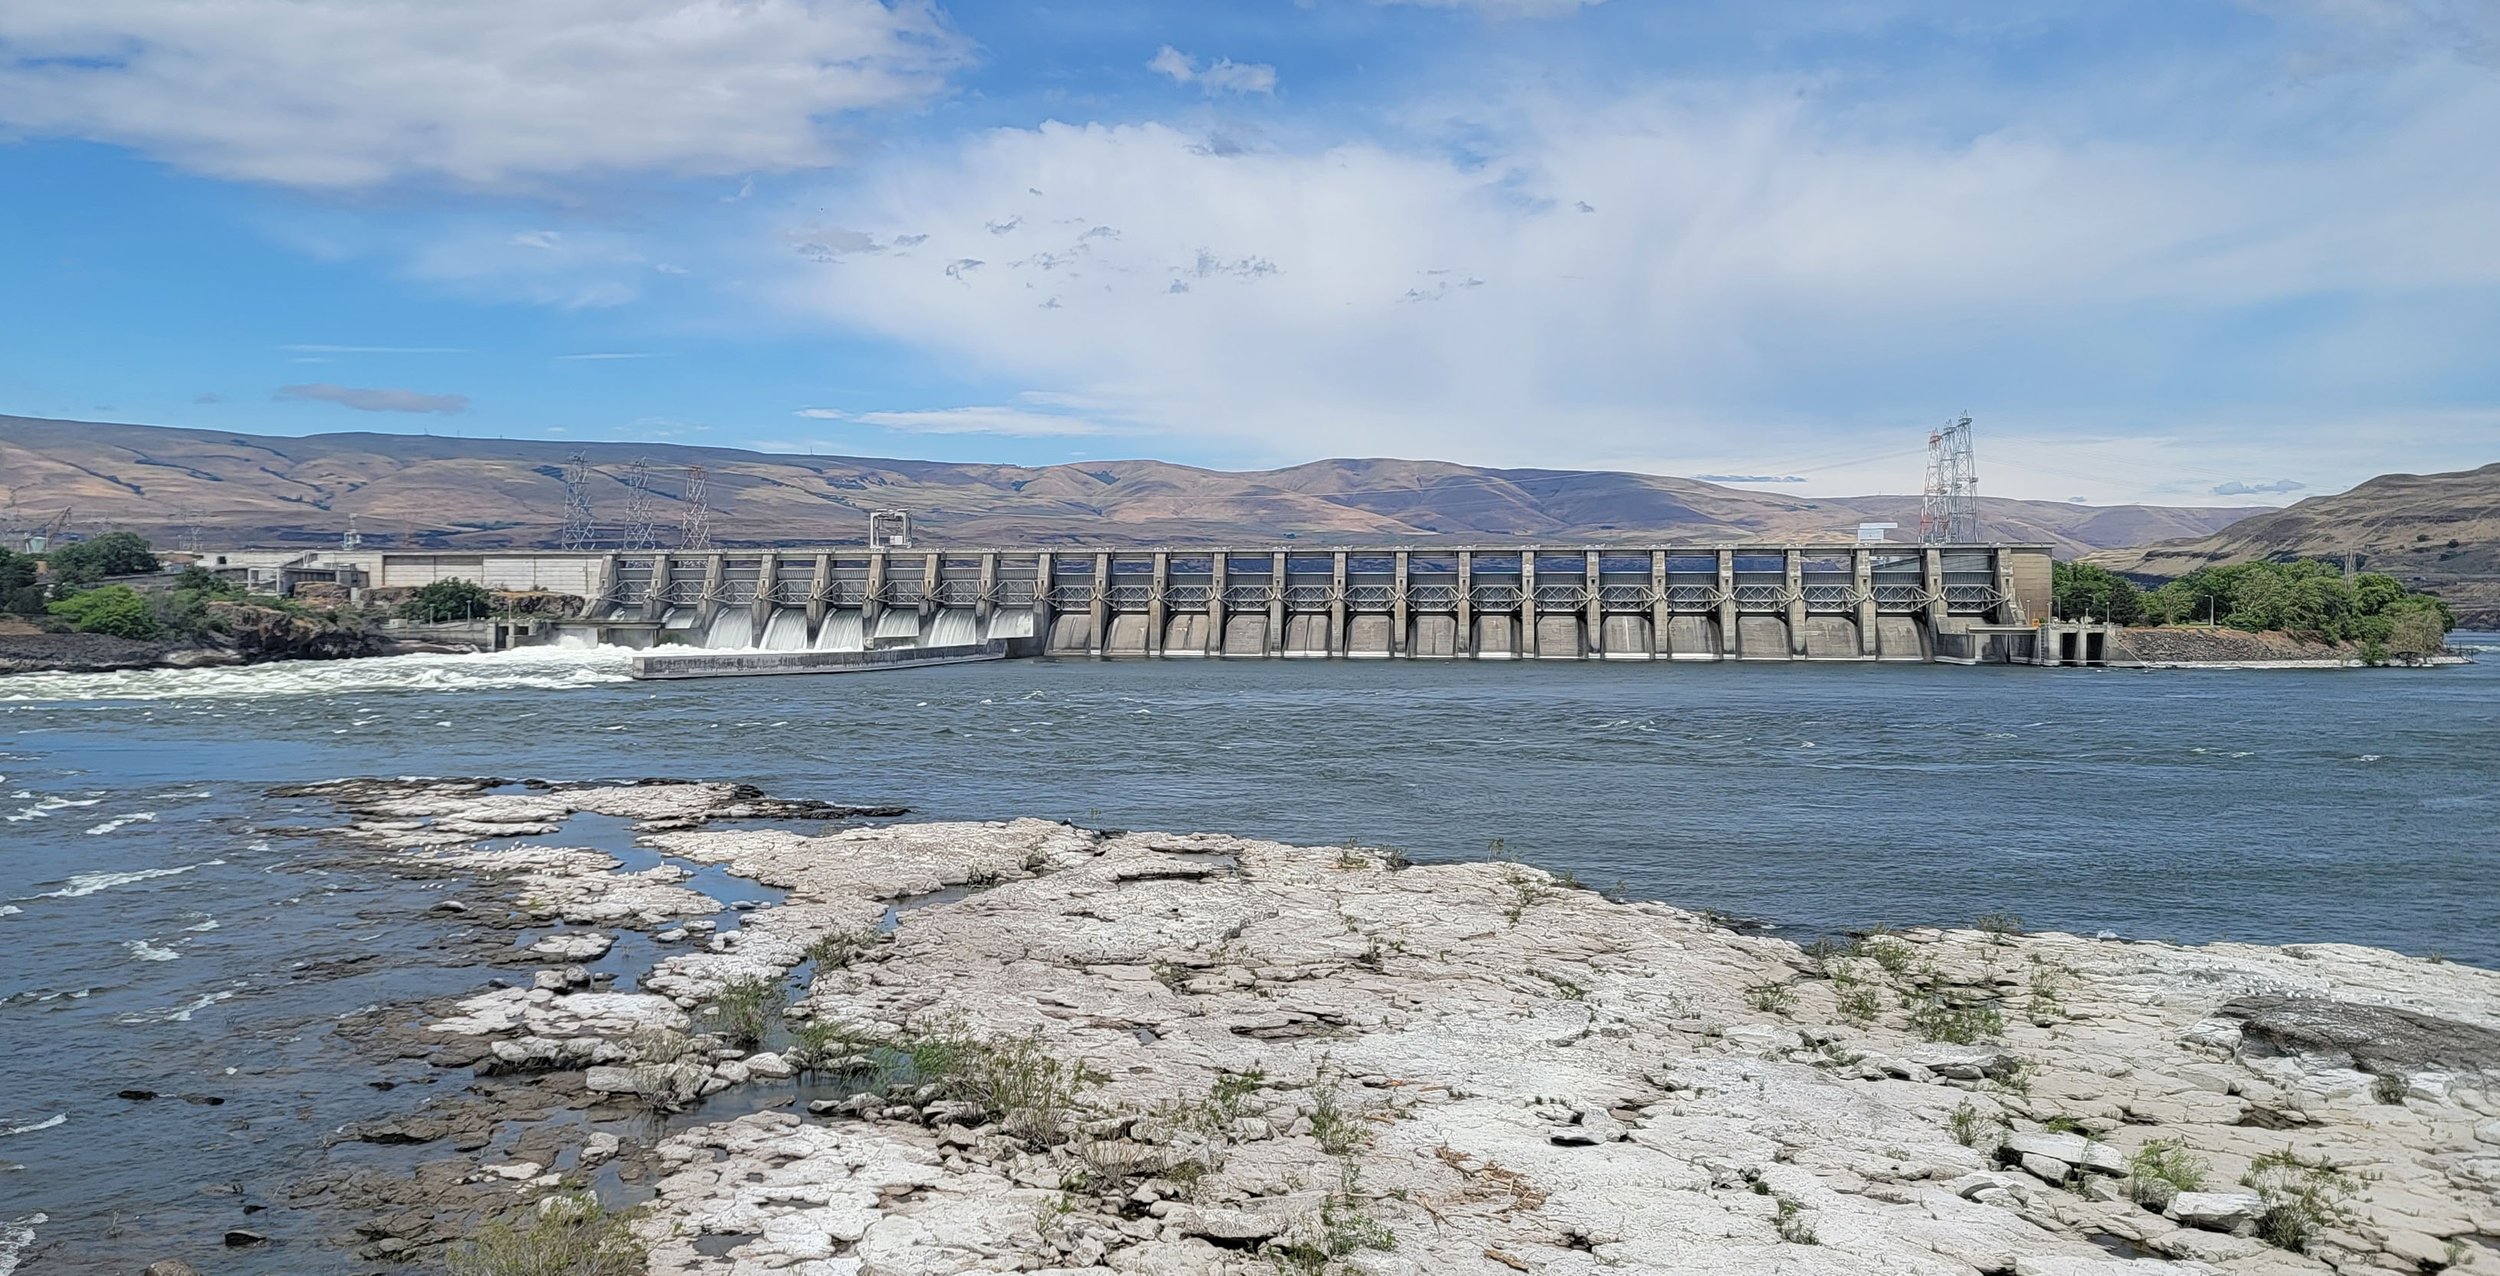  The Dalles dam. Open to visitors. Just no time to detour with a broken derailleur and storm clouds over my head. Life is about compromises. 